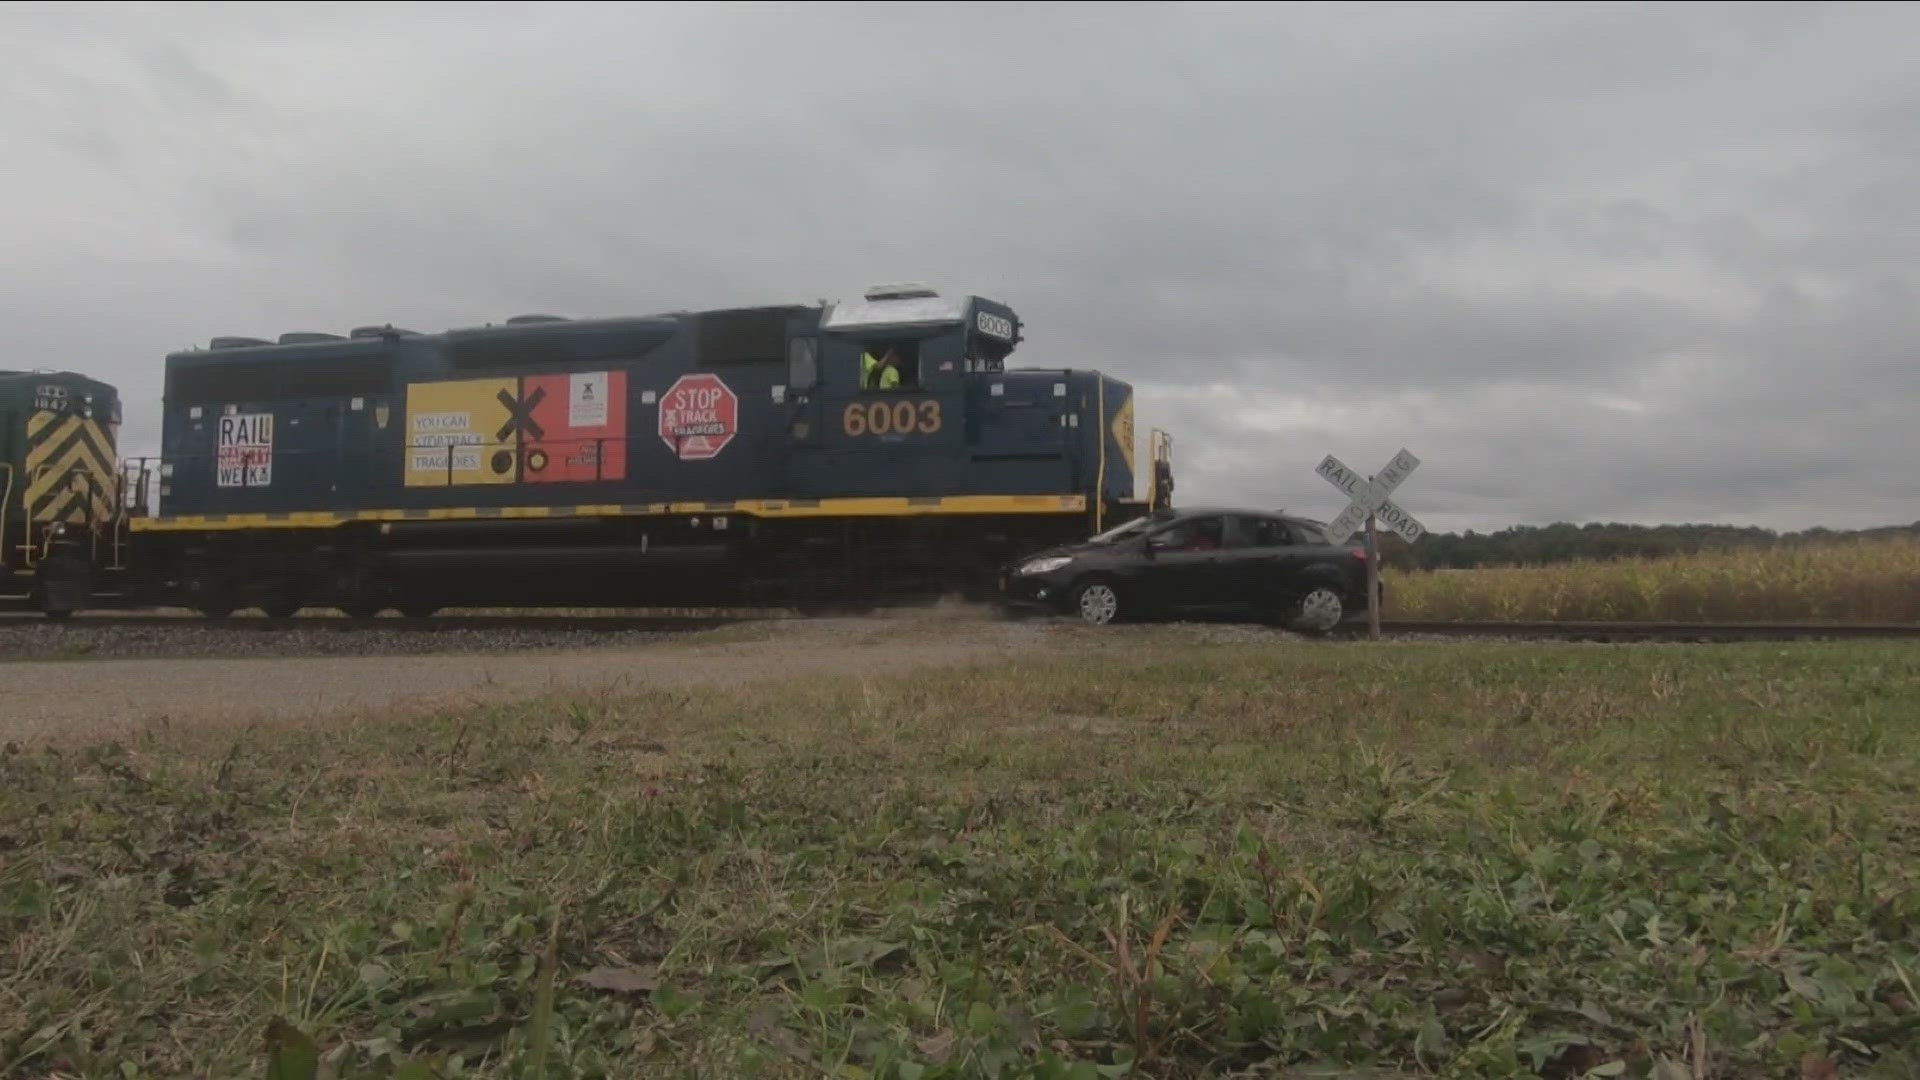 First responders practice train crash situations